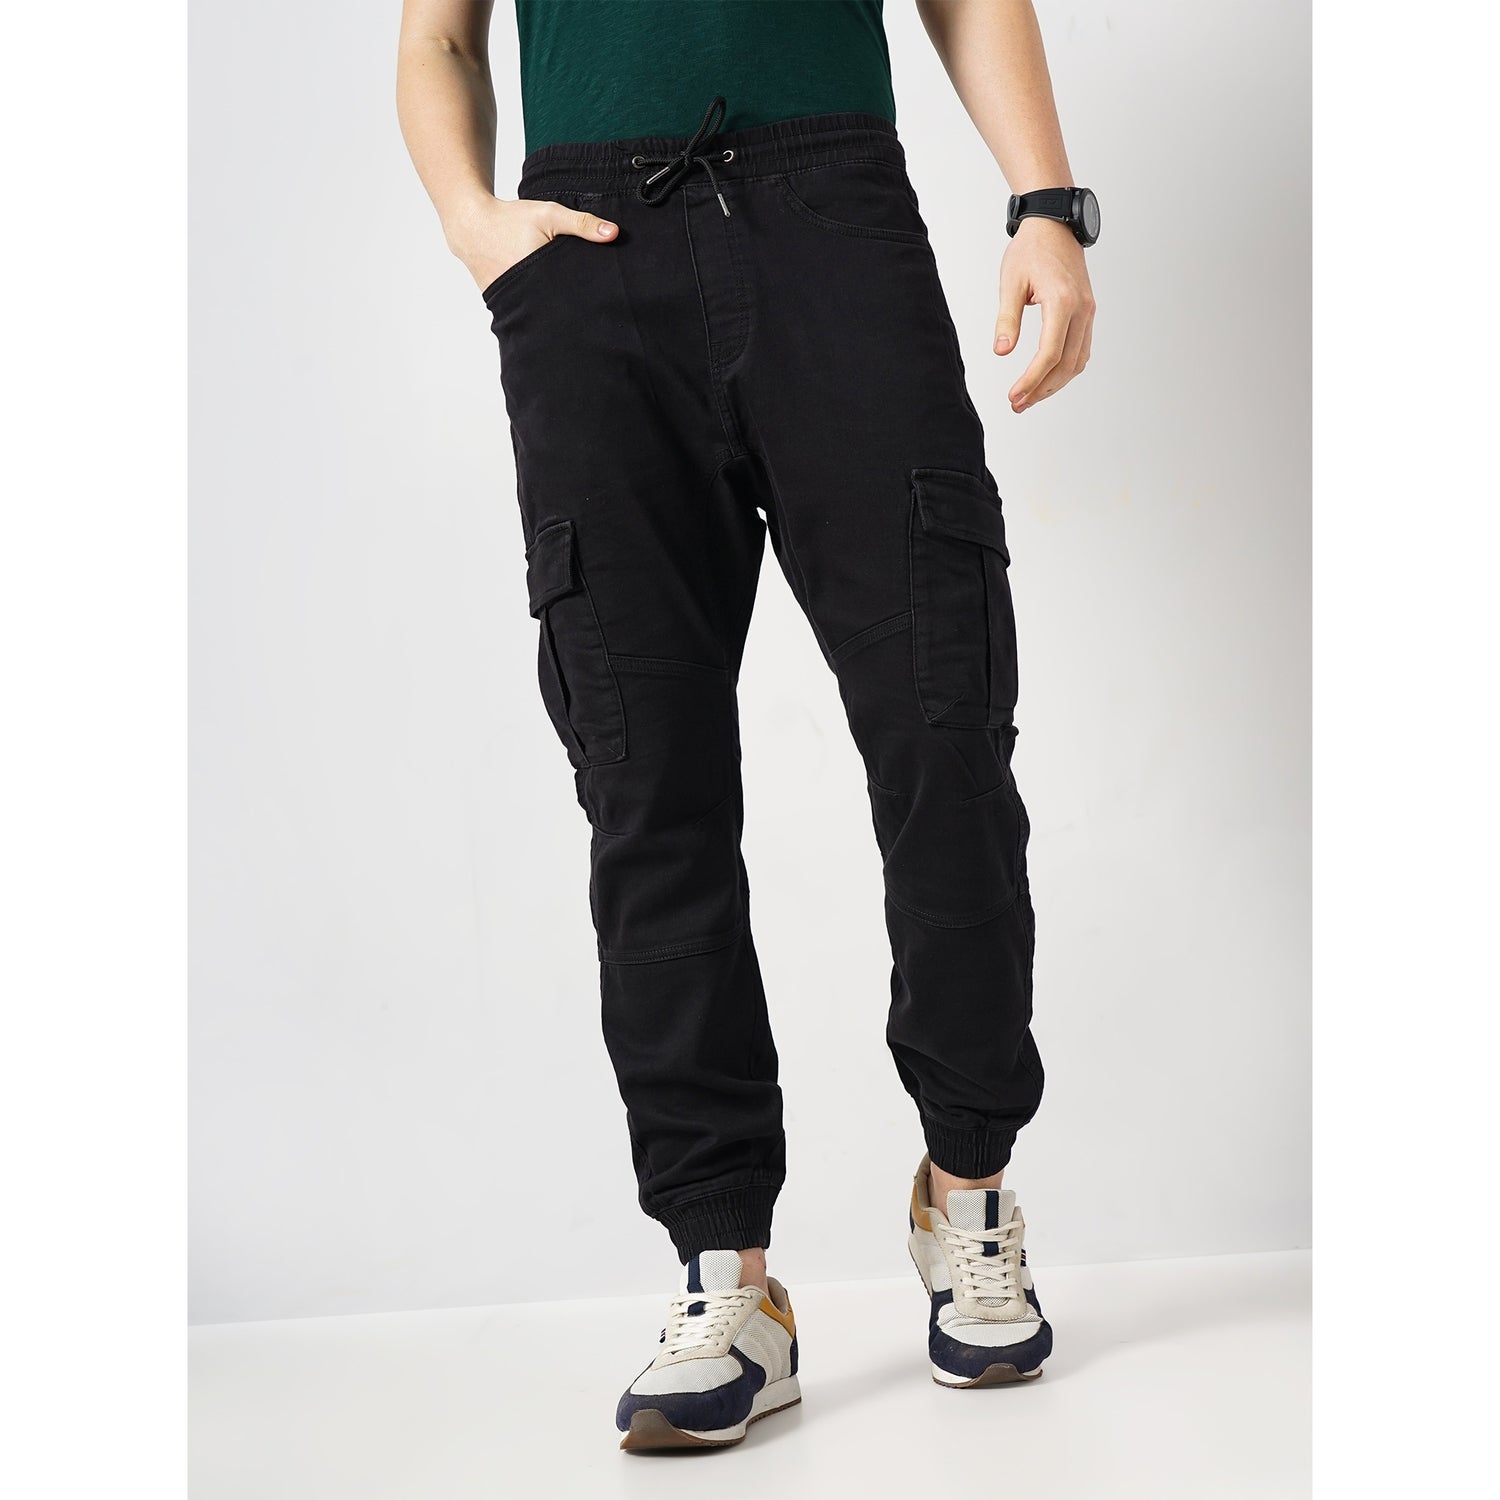 Men Black Solid Loose Fit Cotton Chinos Casual Trousers (FOPLANE1)